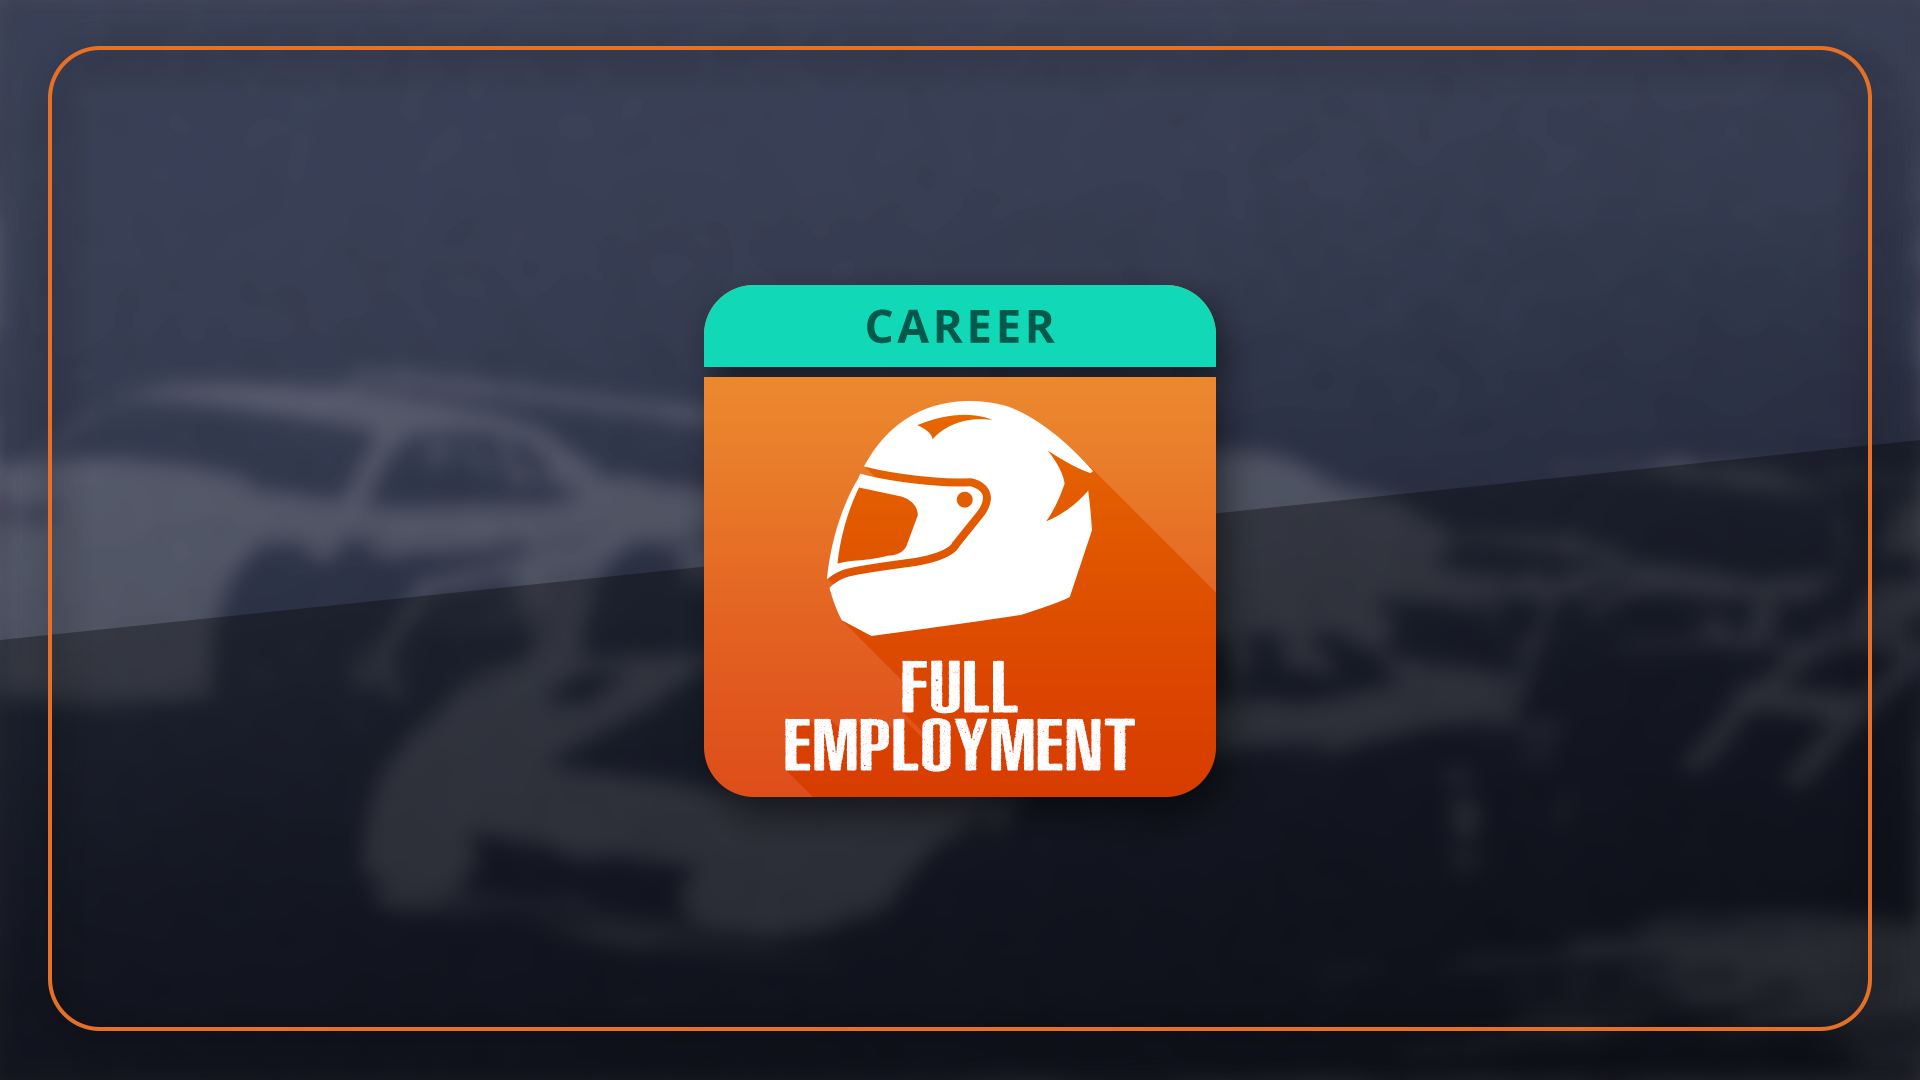 Icon for Full Employment